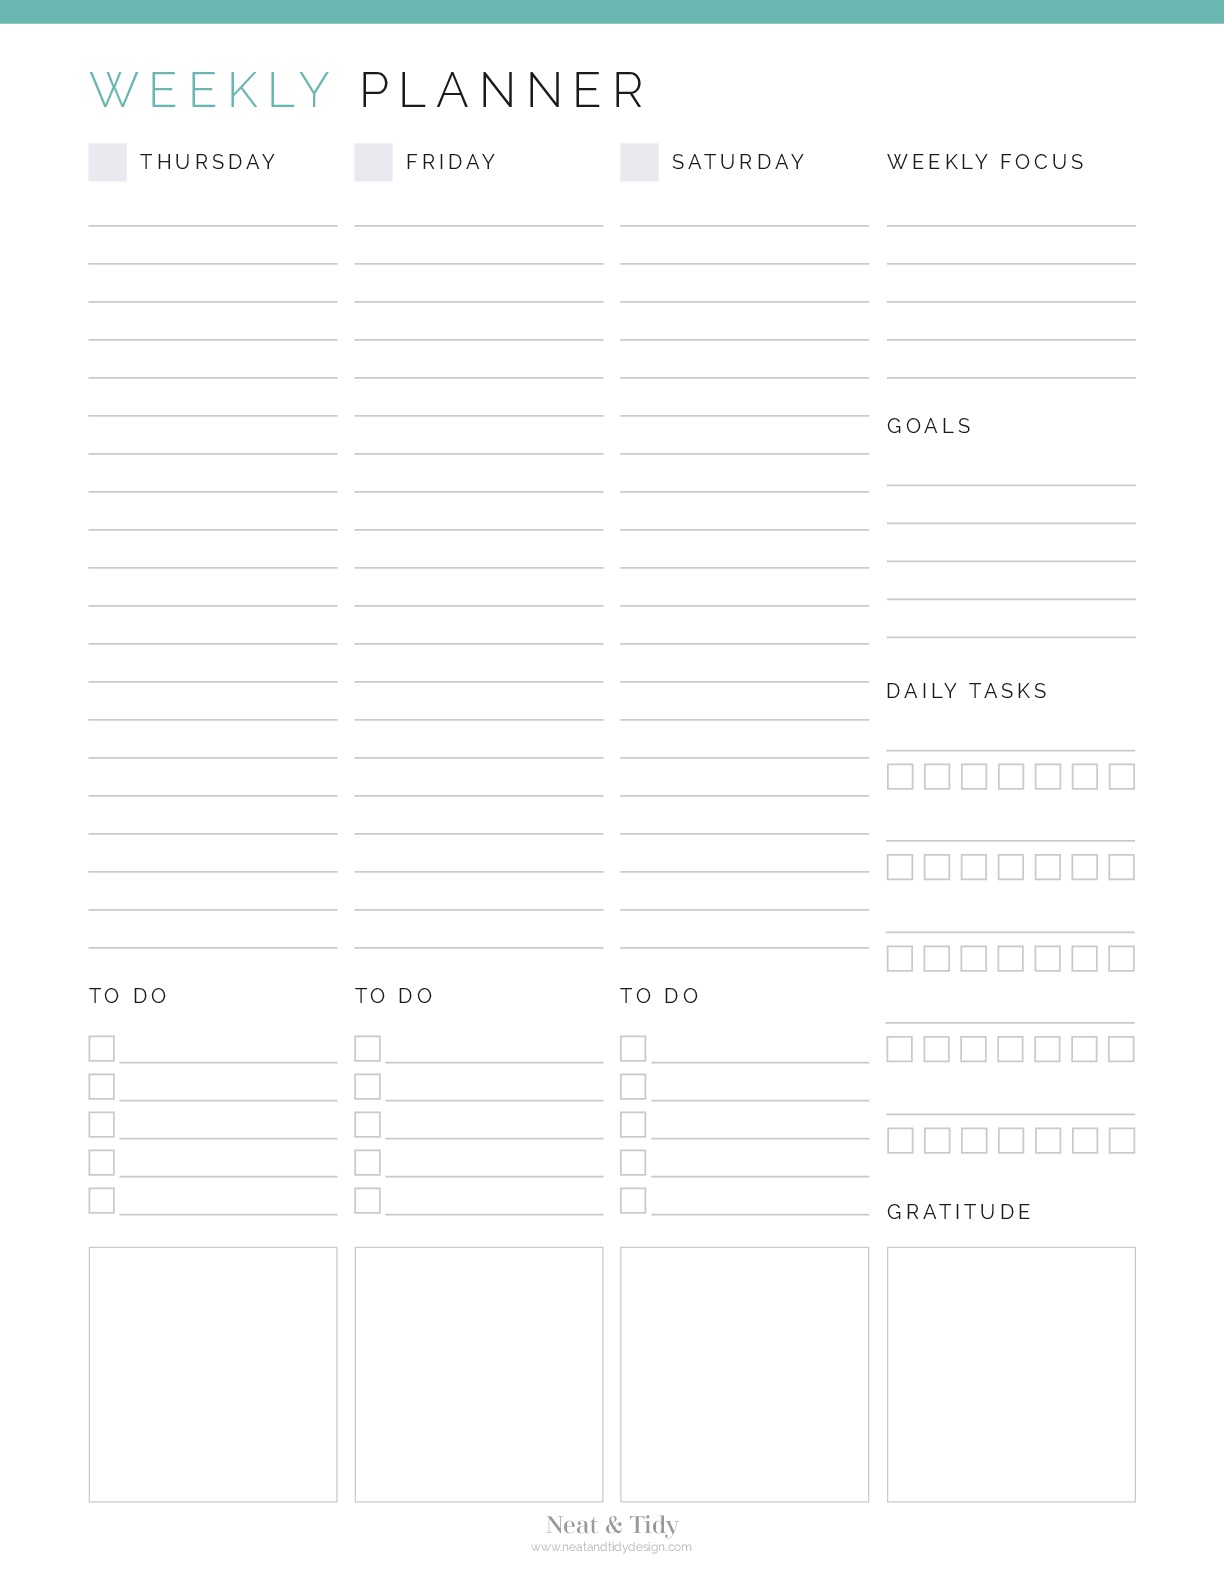 Essential Planner Kit - Neat and Tidy Design